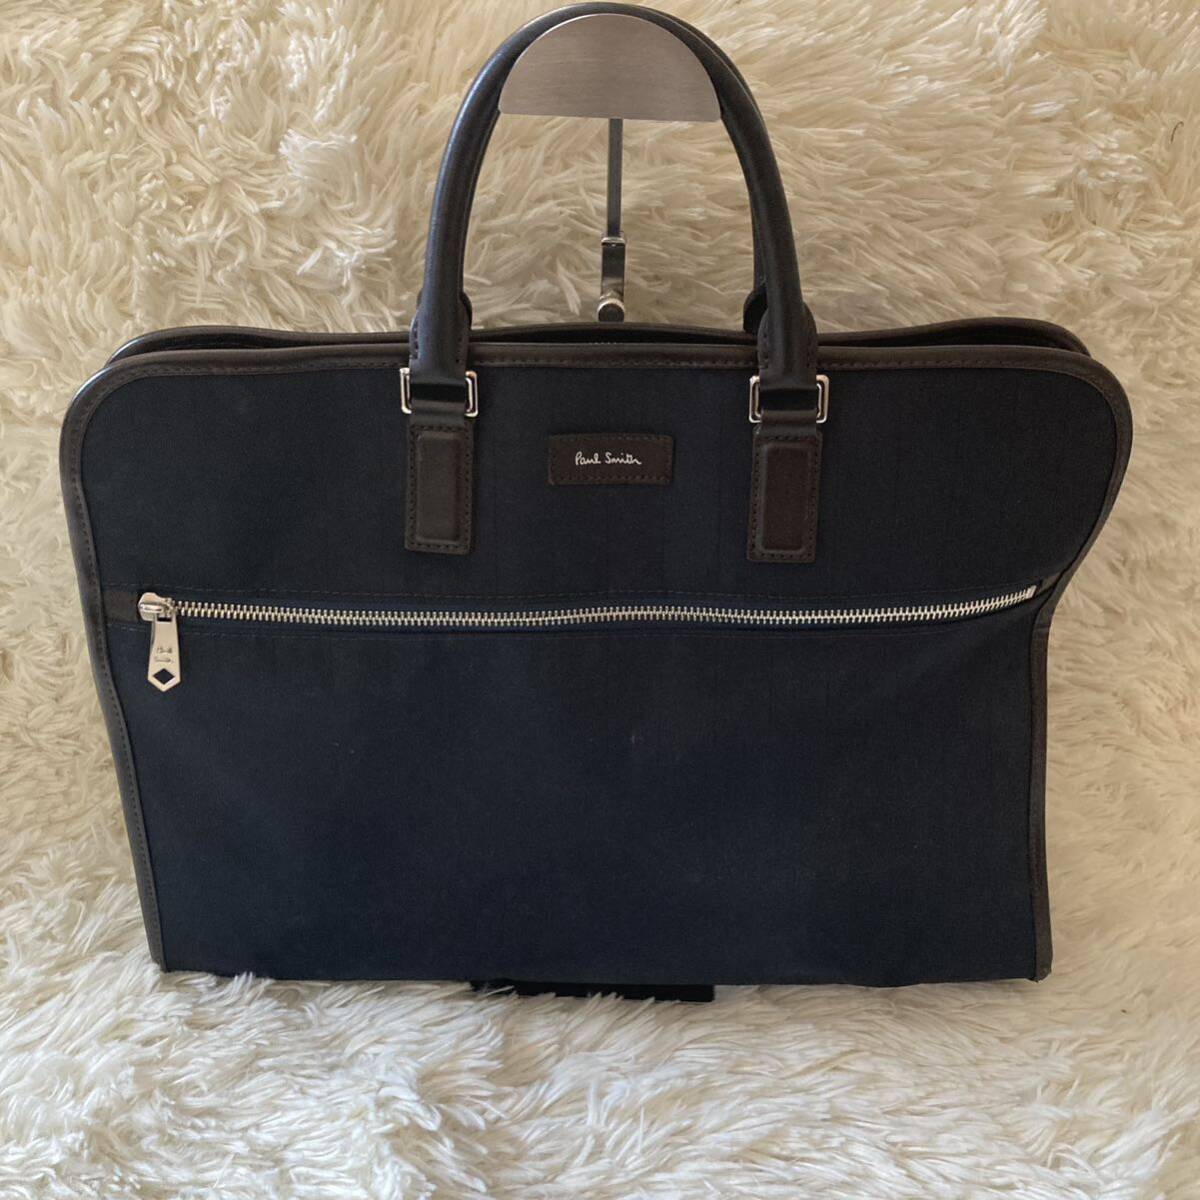 Paul Smith[ gentleman. excellent article ] Paul Smith business bag tote bag handbag nylon leather navy navy blue 